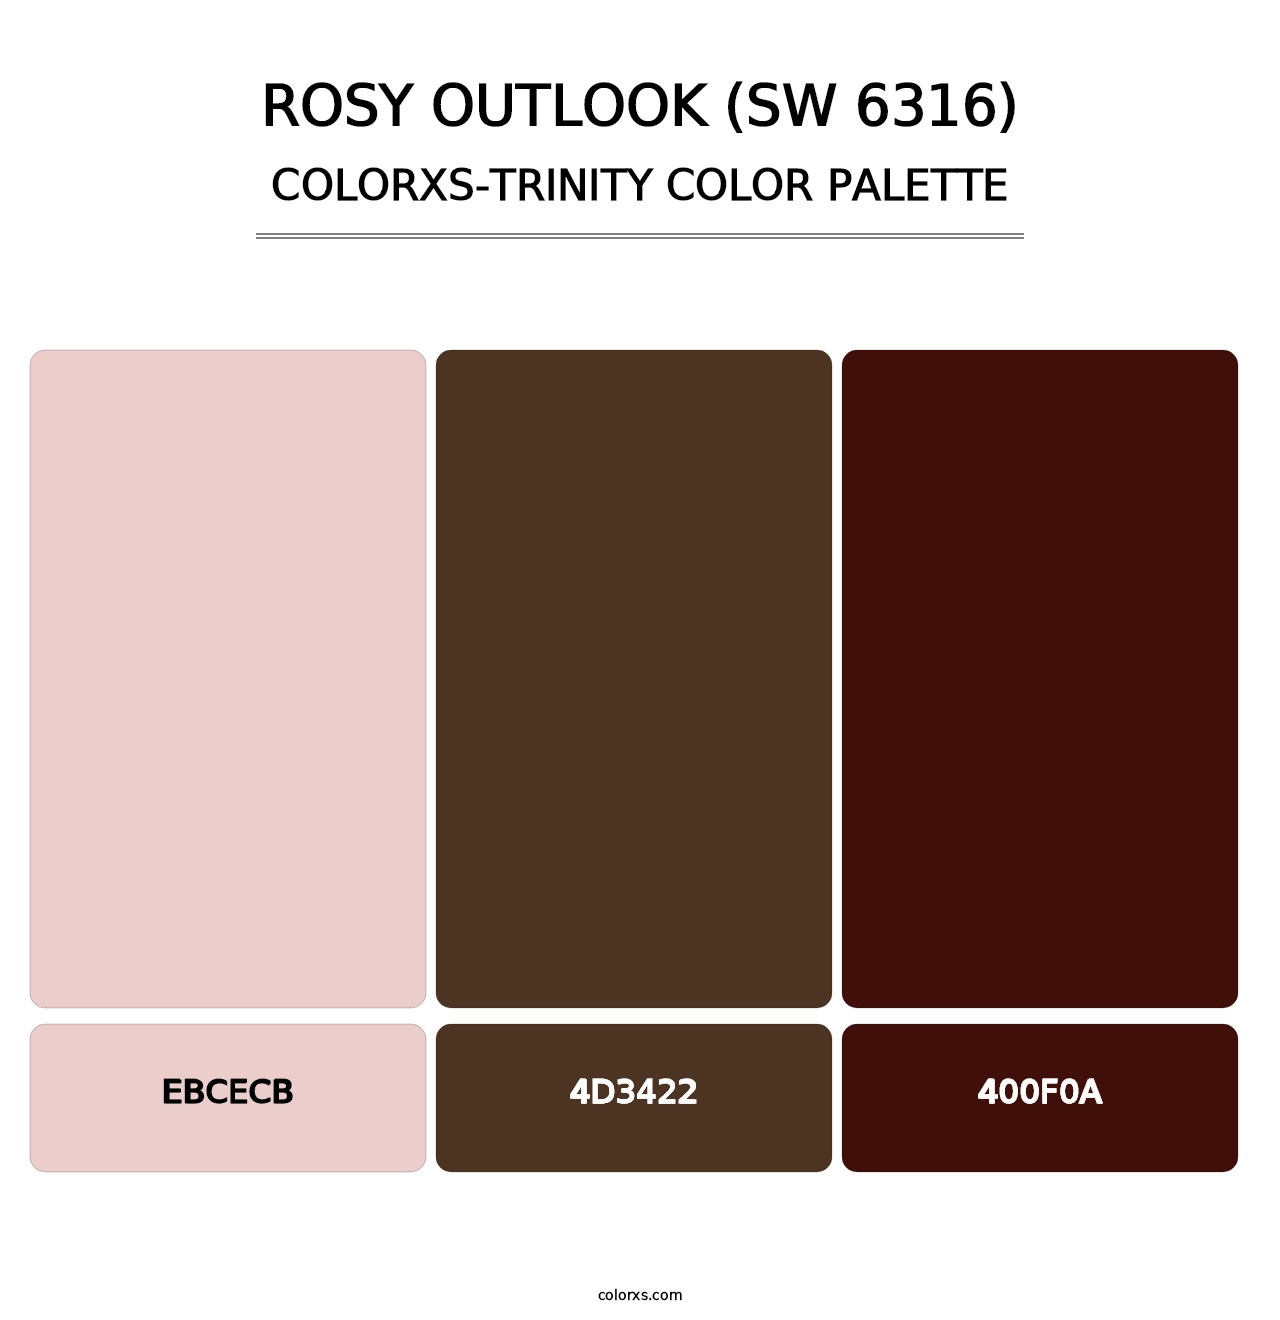 Rosy Outlook (SW 6316) - Colorxs Trinity Palette